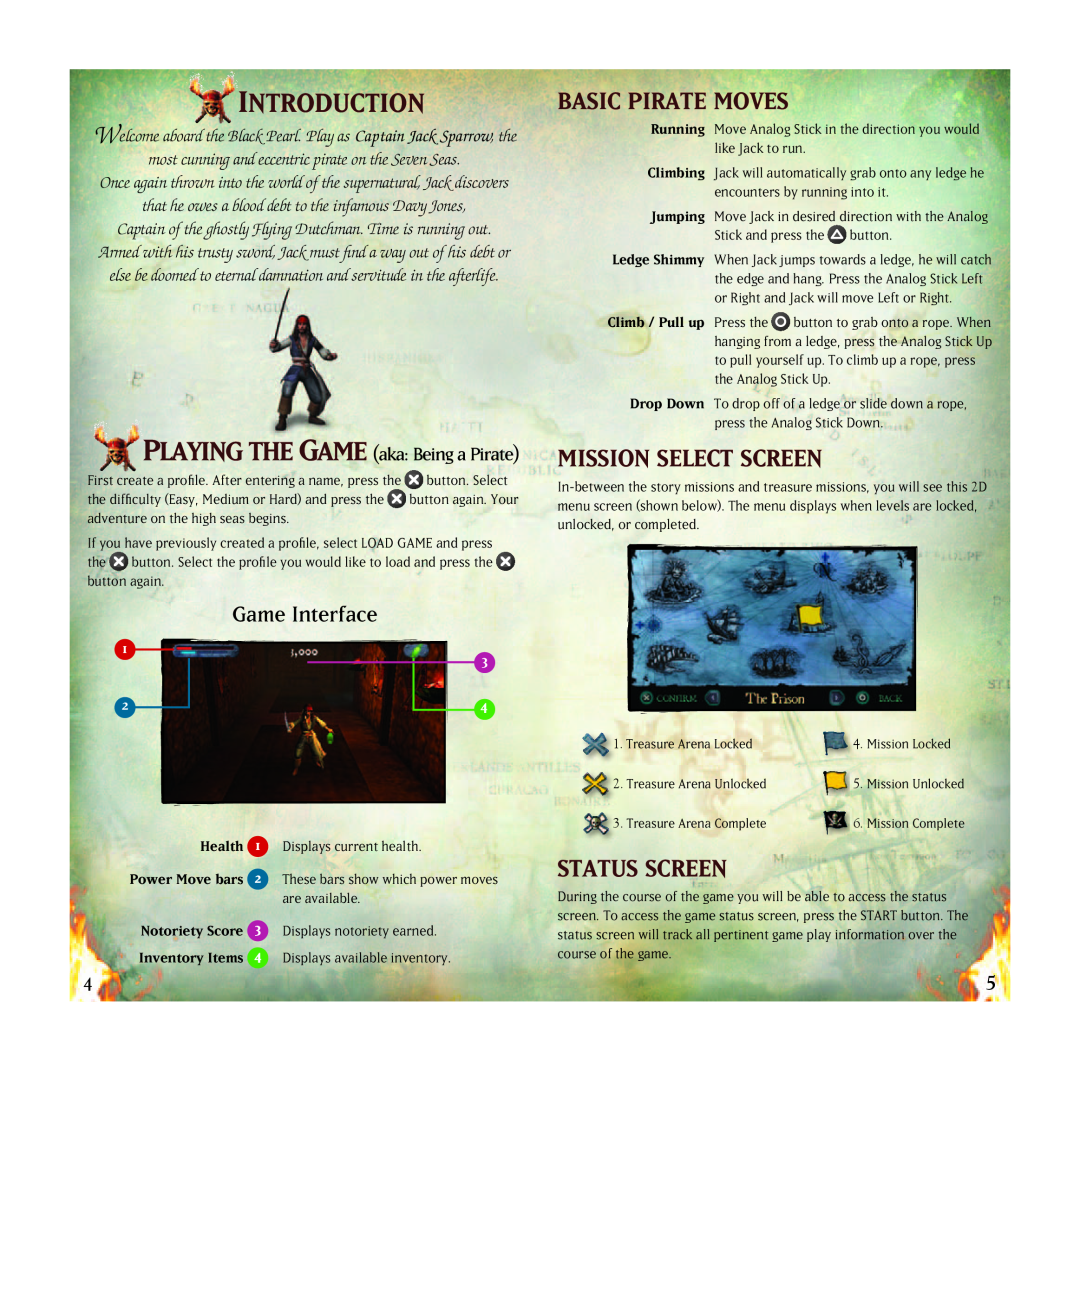 Disney Interactive Studios Pirates of the Caribbean: Dead Man's Chest Introduction, Basic Pirate Moves, Status Screen 